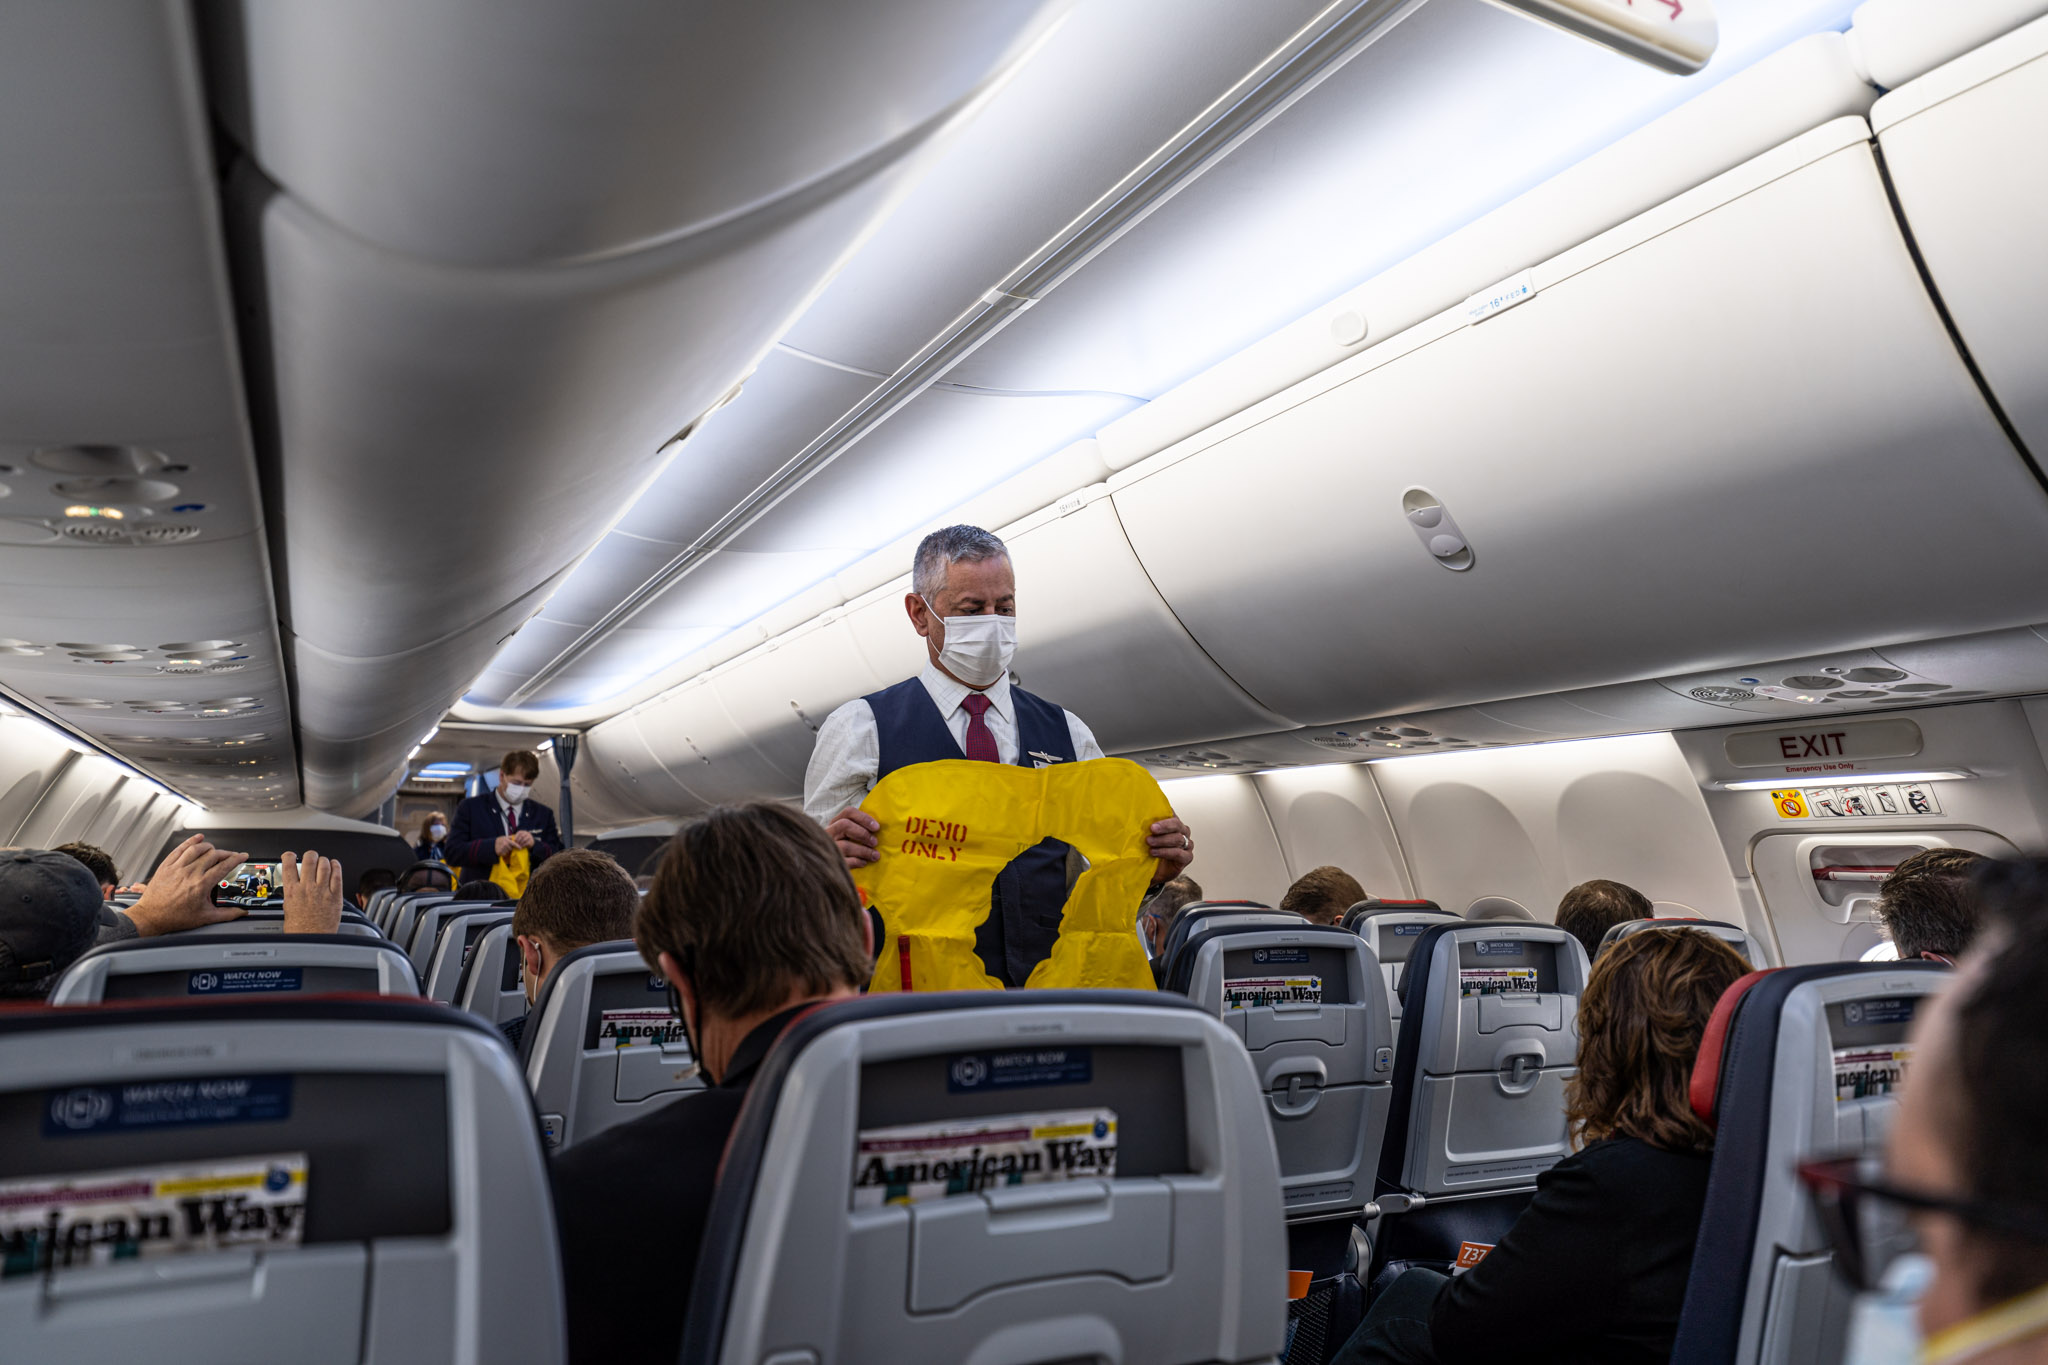 a man wearing a mask and holding a yellow sign on an airplane